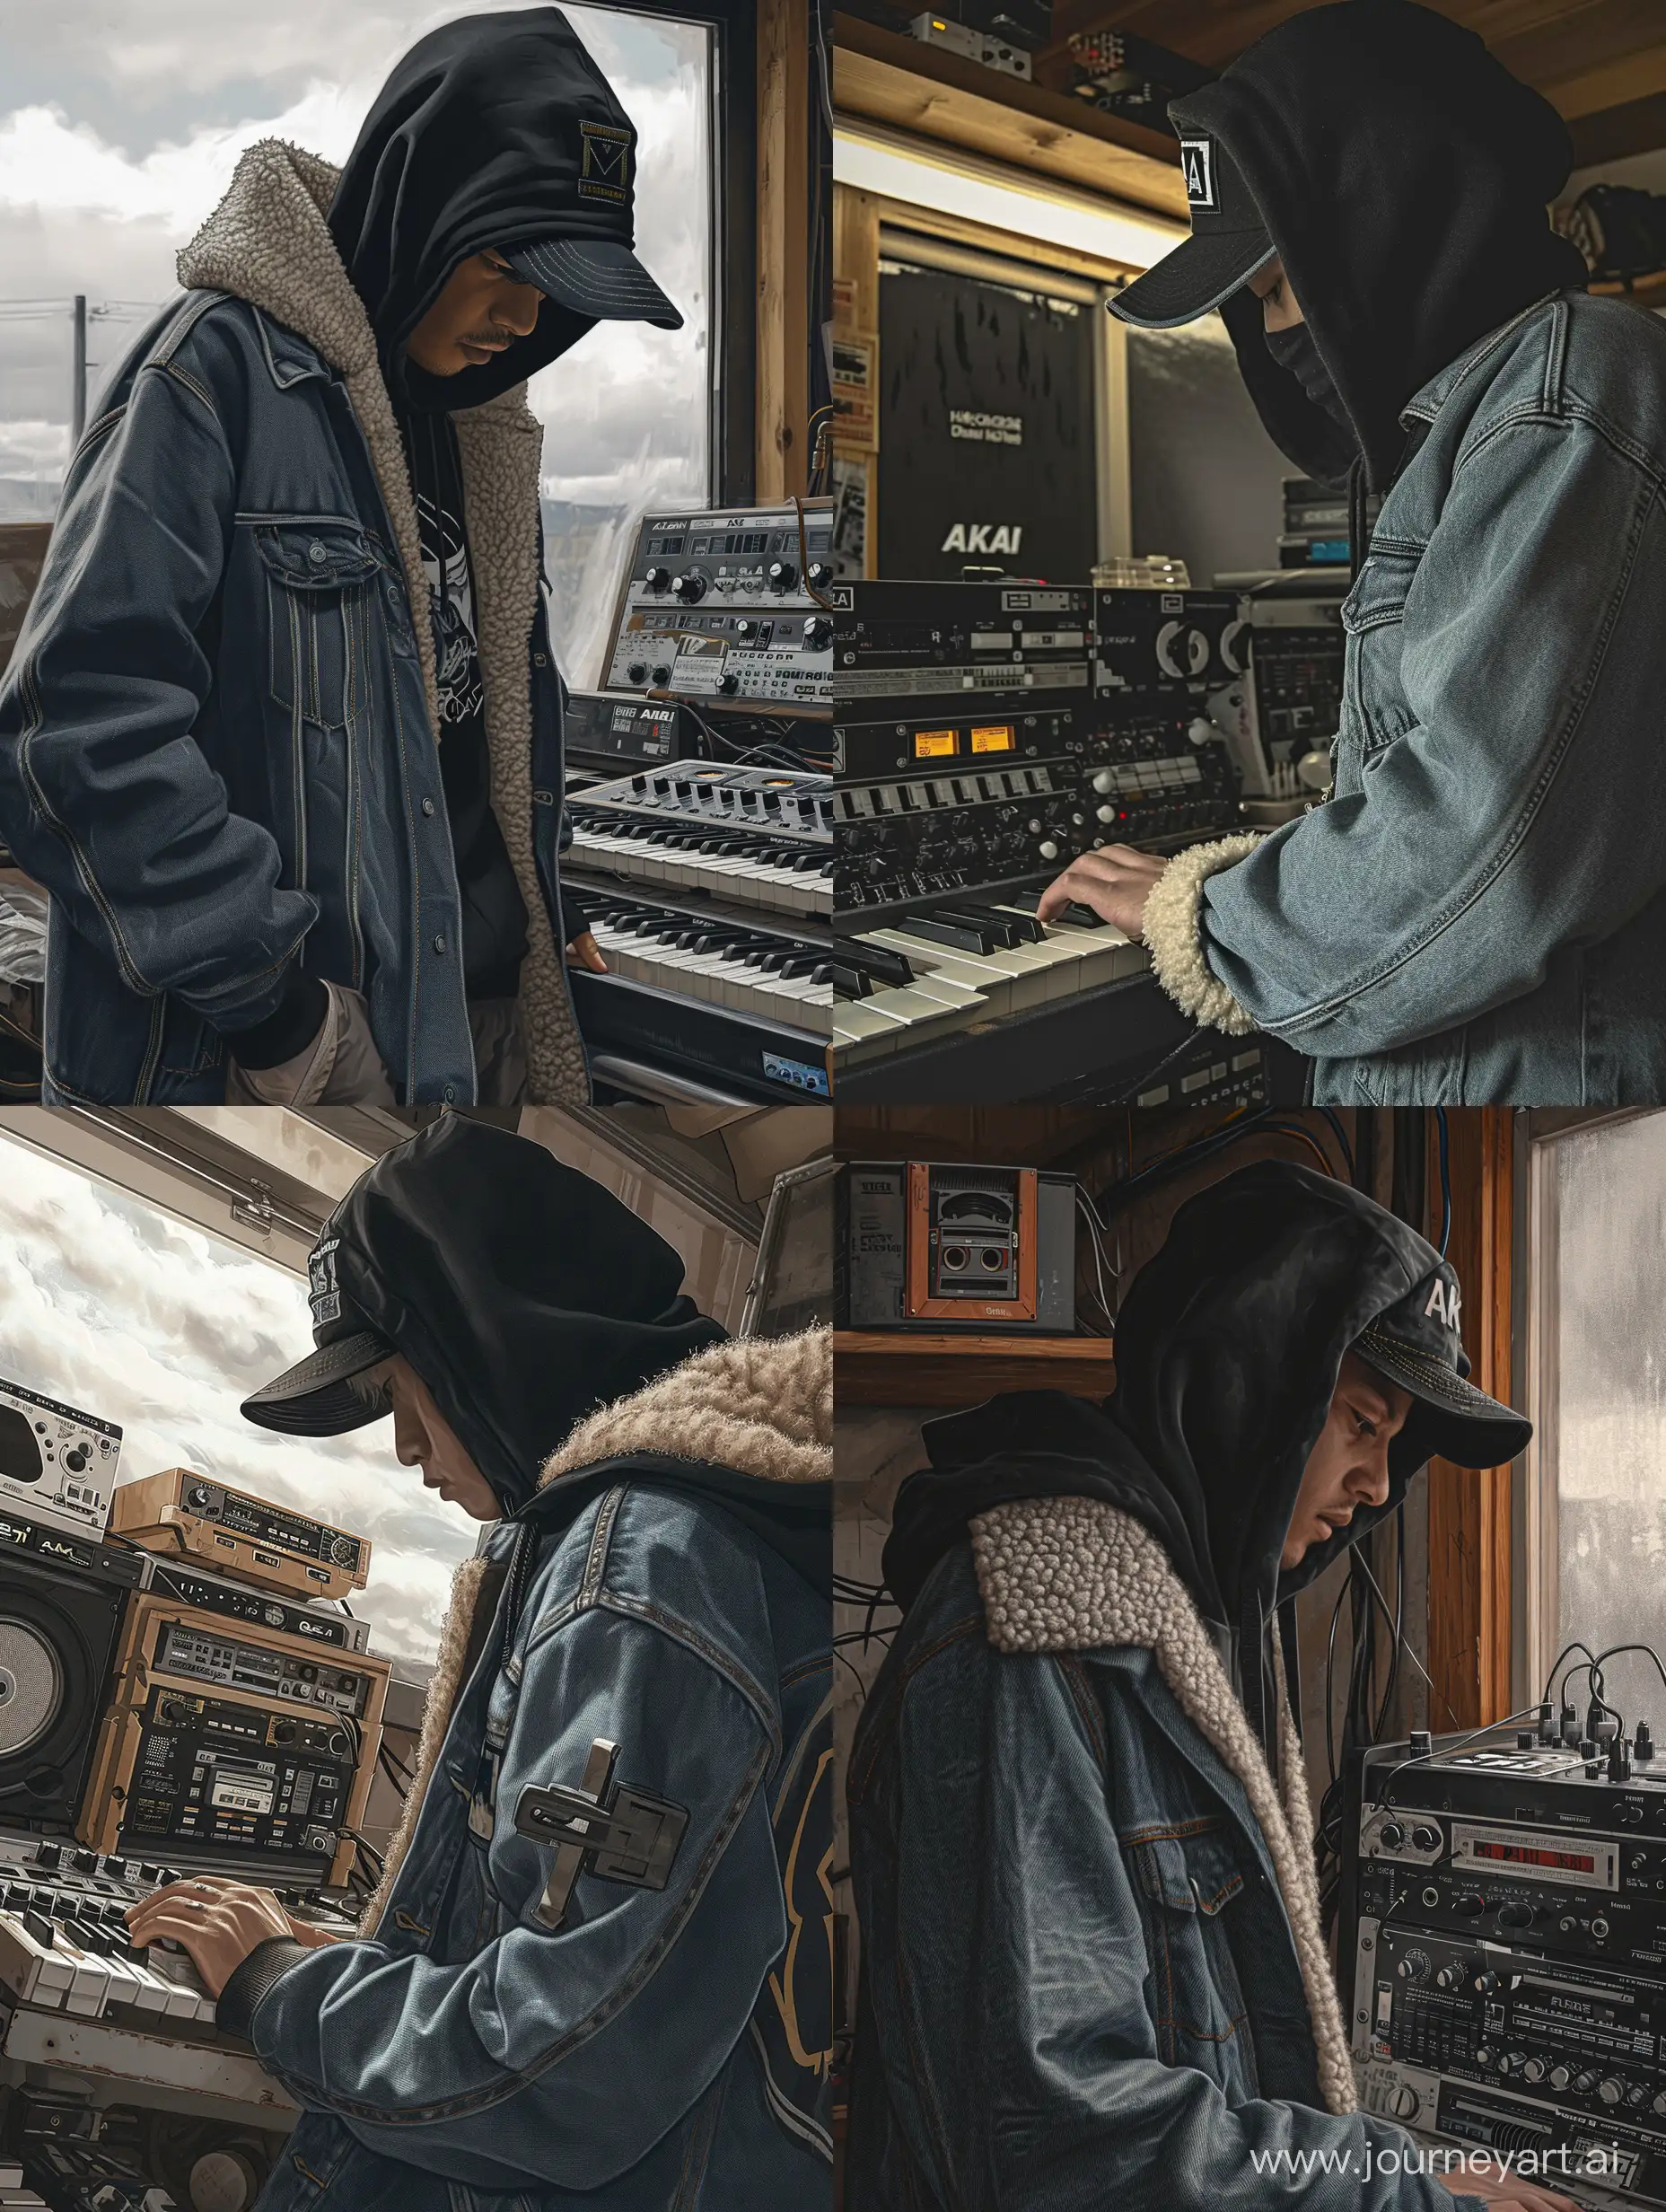 "Style: Hyperrealism. Character: A man in a black hoodie (hood not worn on the head), black snapback cap, denim 'trucker' style jacket lined with sheep's wool. Environment: A dusty music studio in a basement, featuring prominently Akai music equipment and tape cassettes. Action: The character is either creating music or listening to a recording on a cassette. Lighting and colors: Natural lighting suggesting cloudy skies, with a focus on earthy and neutral denim shades. Perspective and composition: Adhering to the golden ratio, focusing on the character and their interaction with the music equipment. Negative Prompt: No neon colors, other characters, unrelated objects, bright colors, elements of fantasy or surrealism. Additional information: To be used as a hip-hop album cover, capturing an atmosphere of concentration and passion for music. Tags: #hiphop, #musicproduction, #akai, #studio, #mixtape. Notes: Emphasis on the details of the clothing and authenticity of the music equipment.